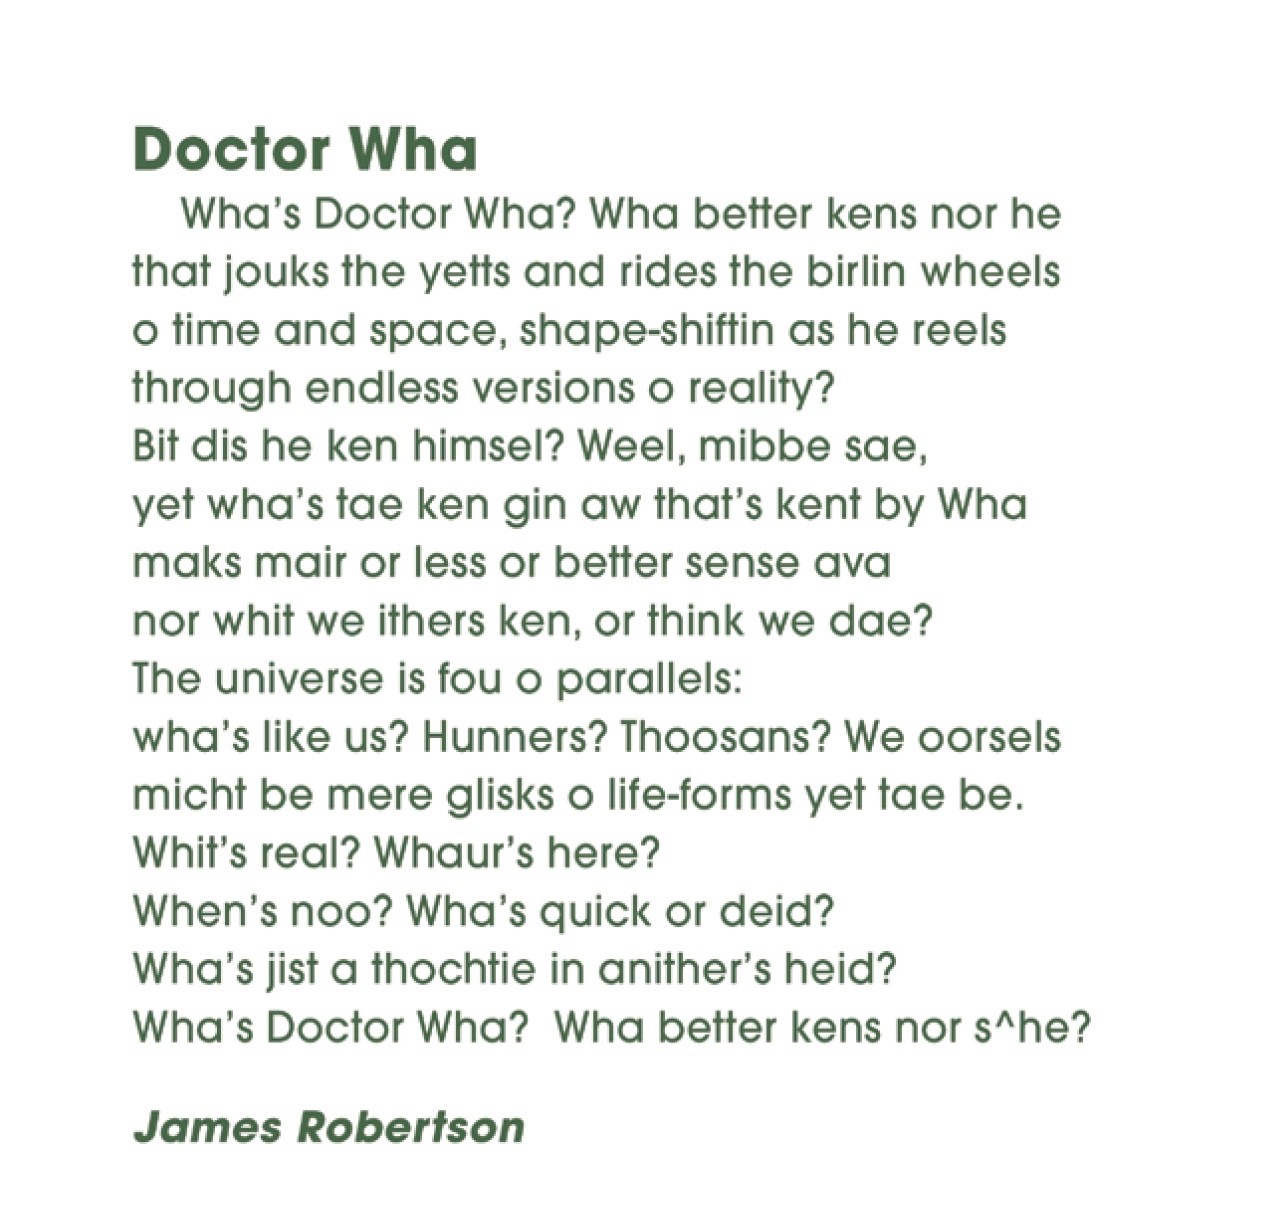 Dr Wha
James Robertson


Wha’s Doctor Wha? Wha better kens nor he
that jouks the yetts and rides the birlin wheels
o time and space, shape-shiftin as he reels
through endless versions o reality?
Bit dis he ken himsel? Weel, mibbe sae,
yet wha’s tae ken gin aw that’s kent by Wha
maks mair or less or better sense ava
nor whit we ithers ken, or think we dae?
The universe is fou o parallels:
wha’s like us? Hunners? Thoosans? We oorsels
micht be mere glisks o life-forms yet tae be.
Whit’s real? Whaur’s here? When’s noo? Wha’s quick or deid?
Wha’s jist a thochtie in anither’s heid?
Wha’s Doctor Wha? Wha better kens nor s^he?